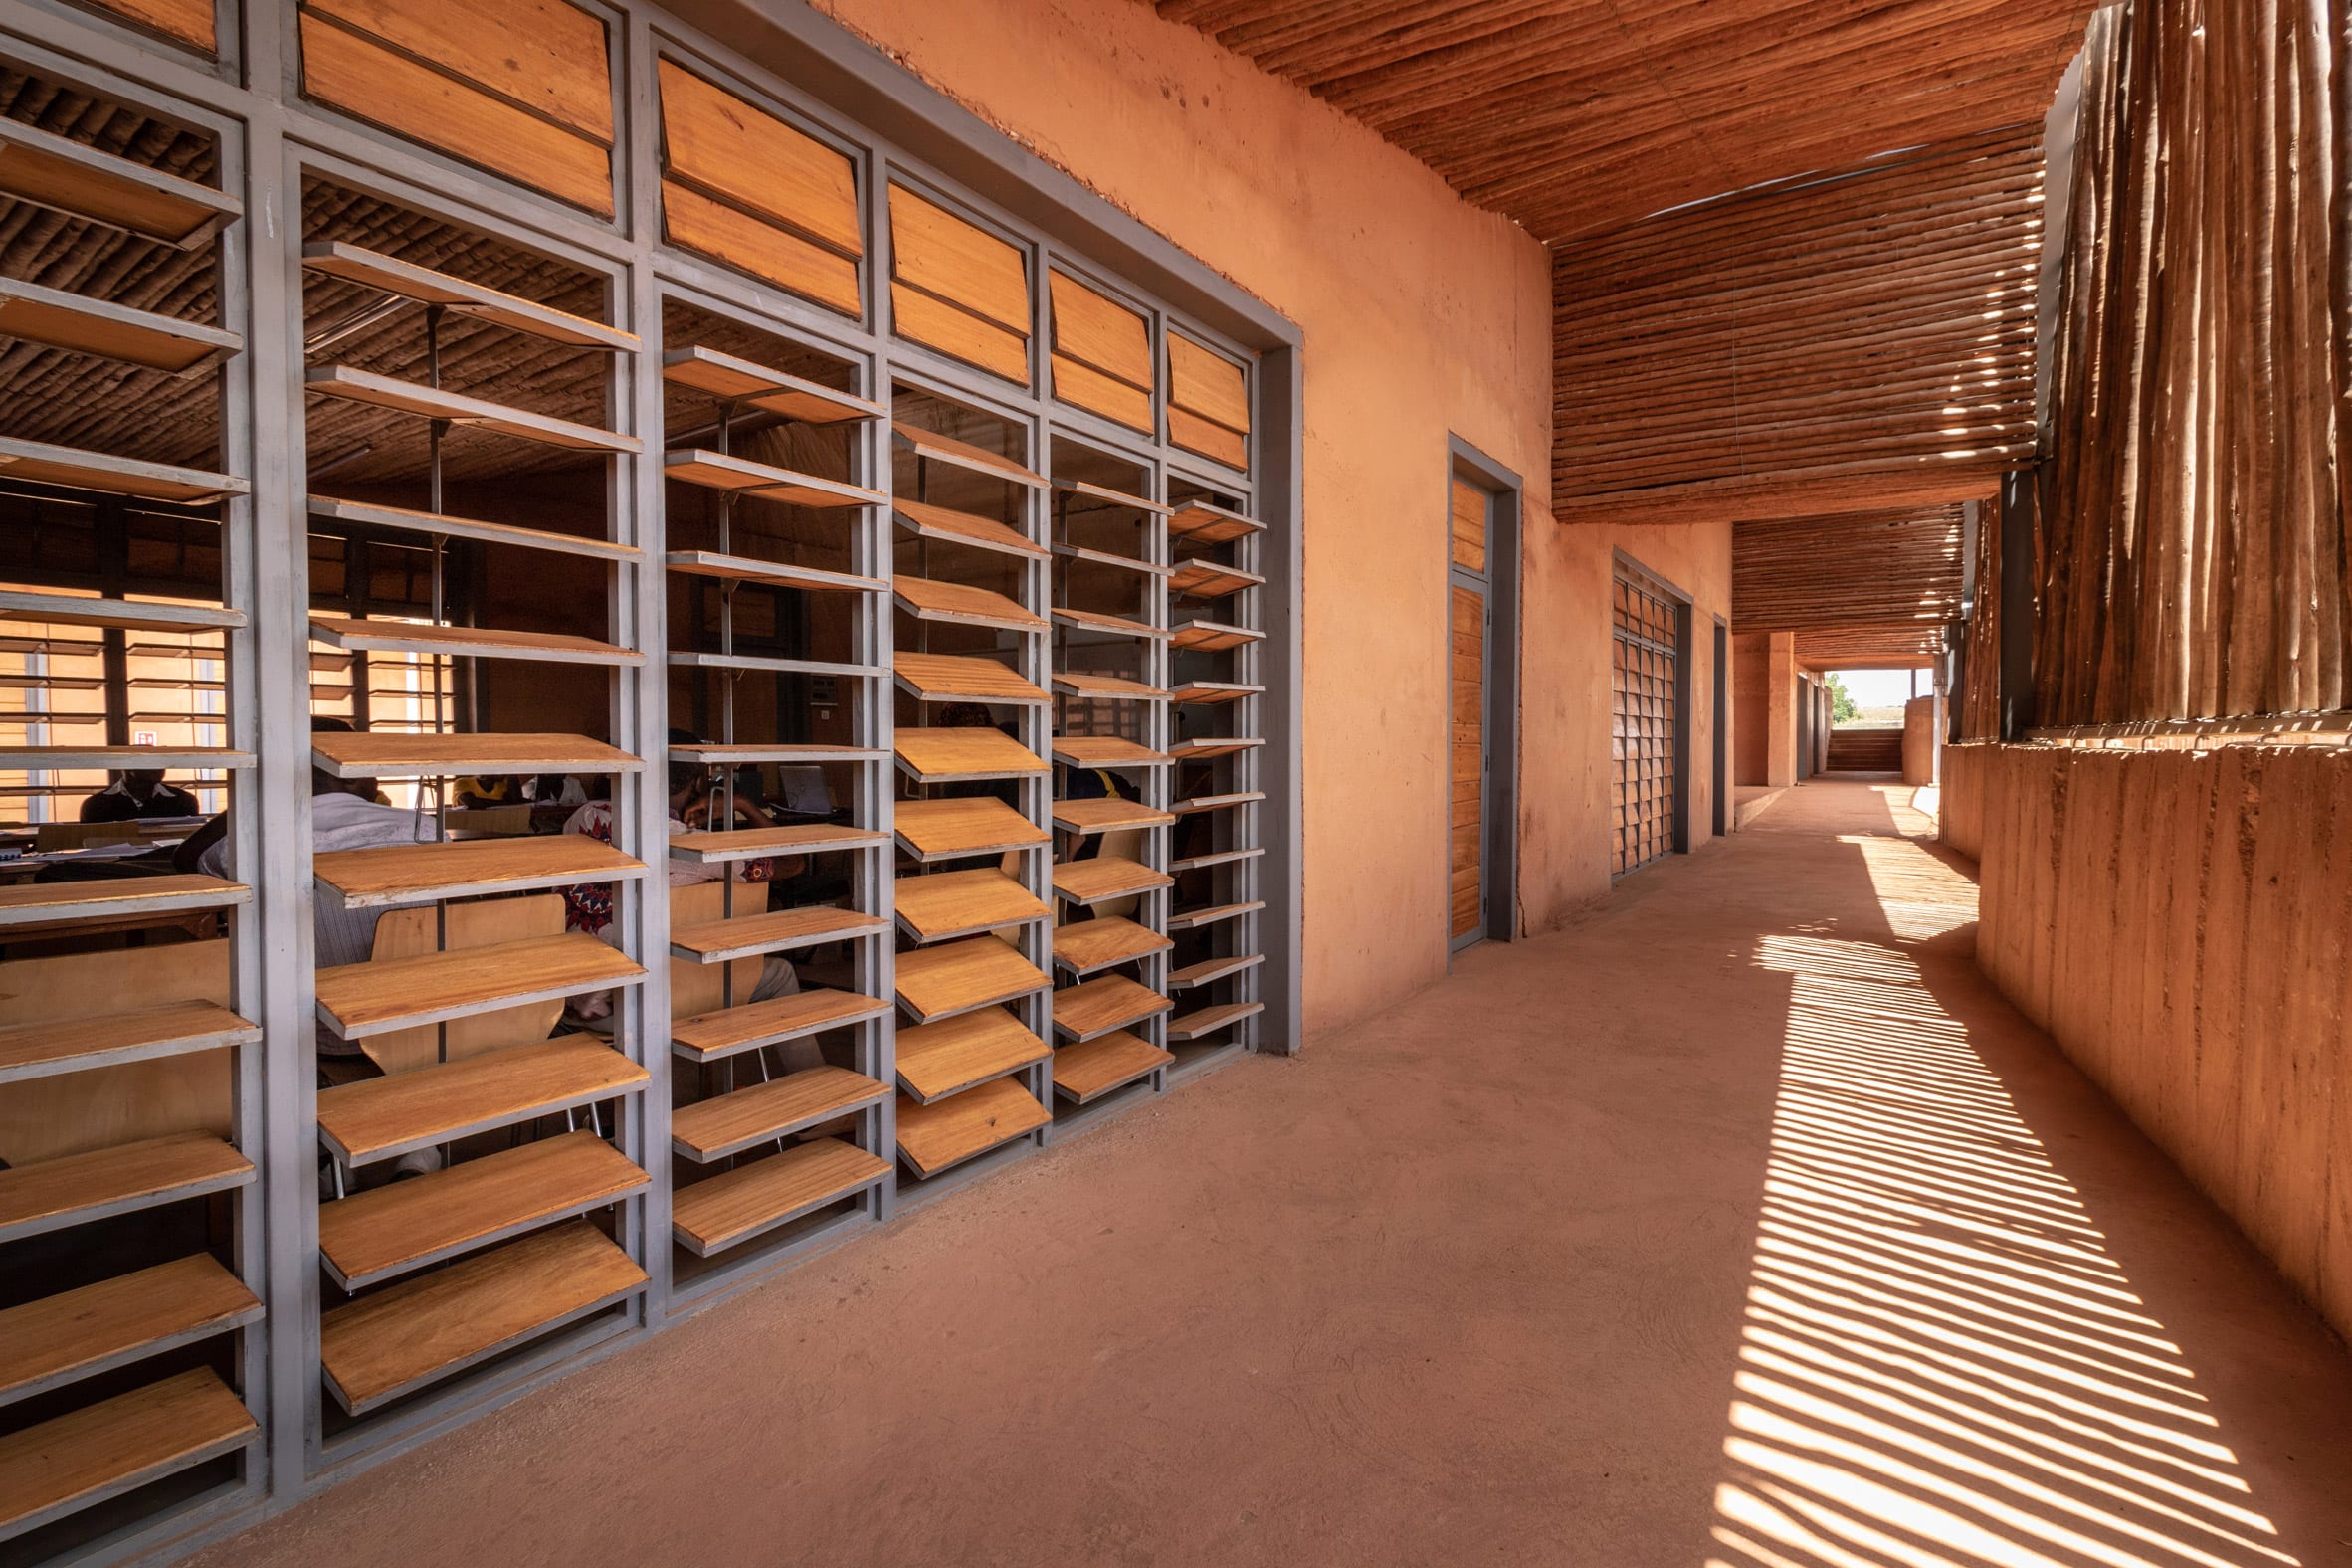 A corridor of the Burkina Institute of Technology